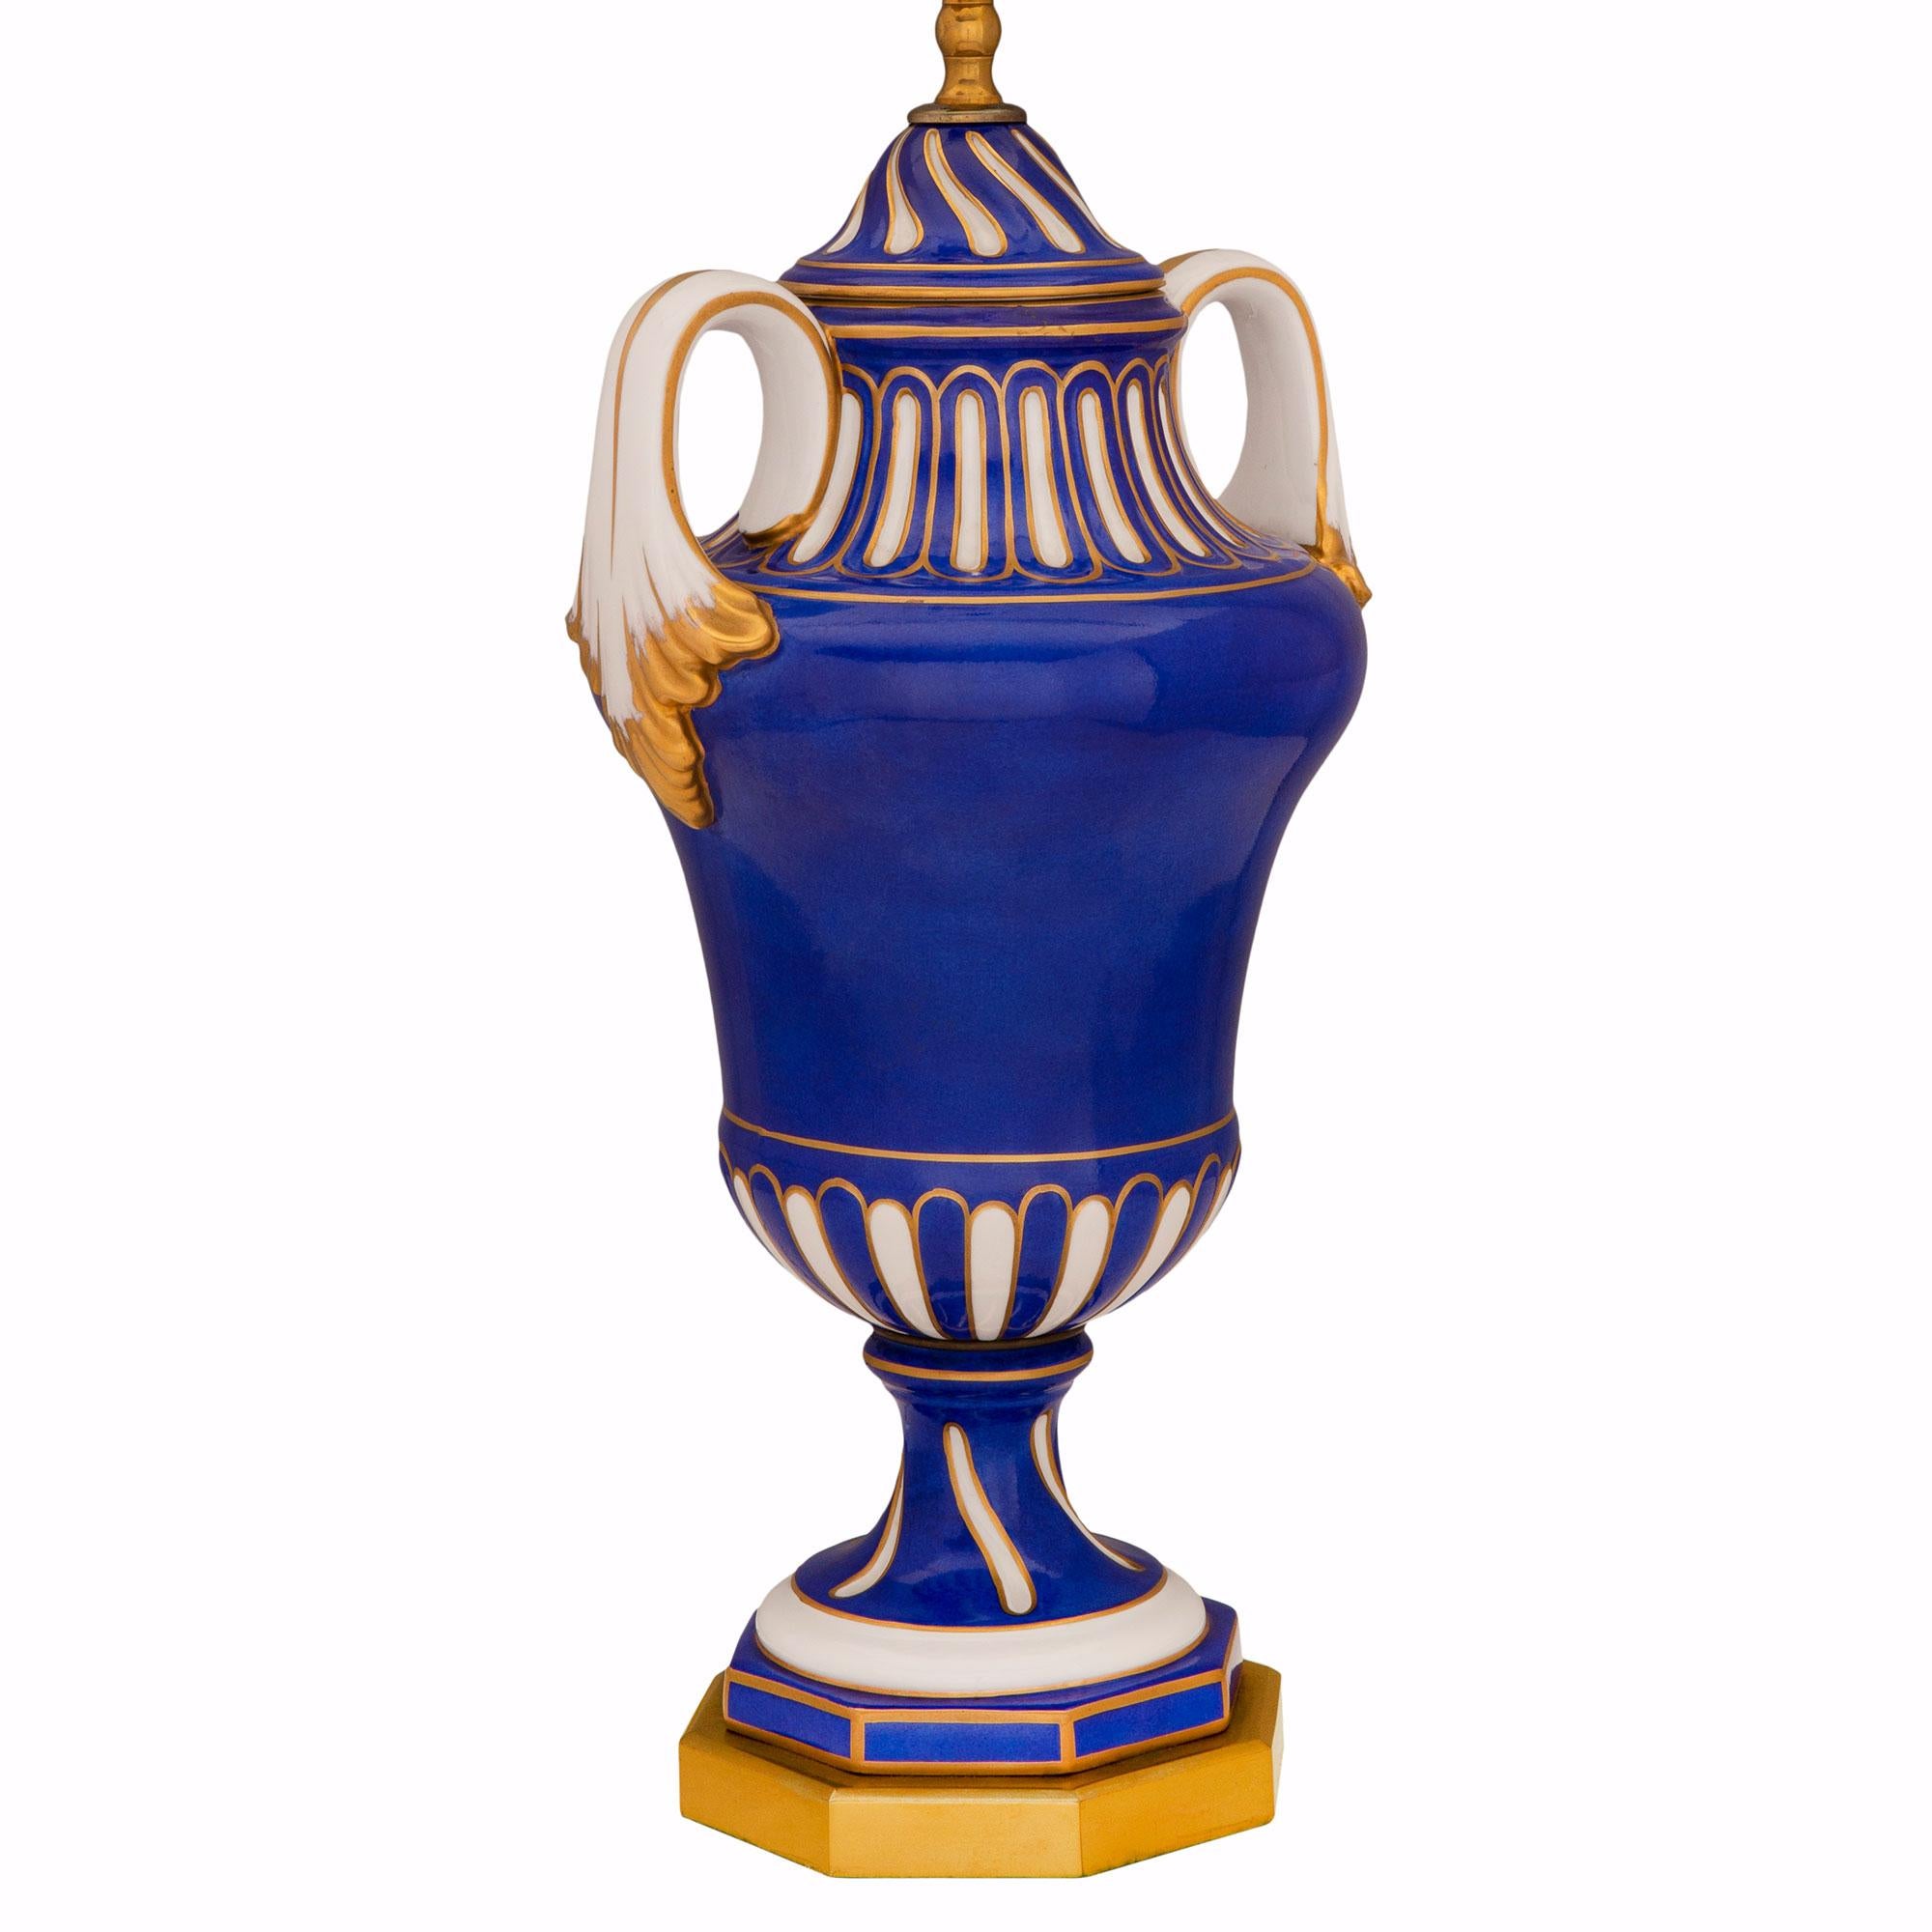 A most decorative French 19th century Louis XVI st. 'Porcelain de Paris' and ormolu urn mounted into a lamp. The lamp is raised by an elegant octagonal ormolu base below the lovely blue and white socle shaped pedestal with fine gilt fillets. The